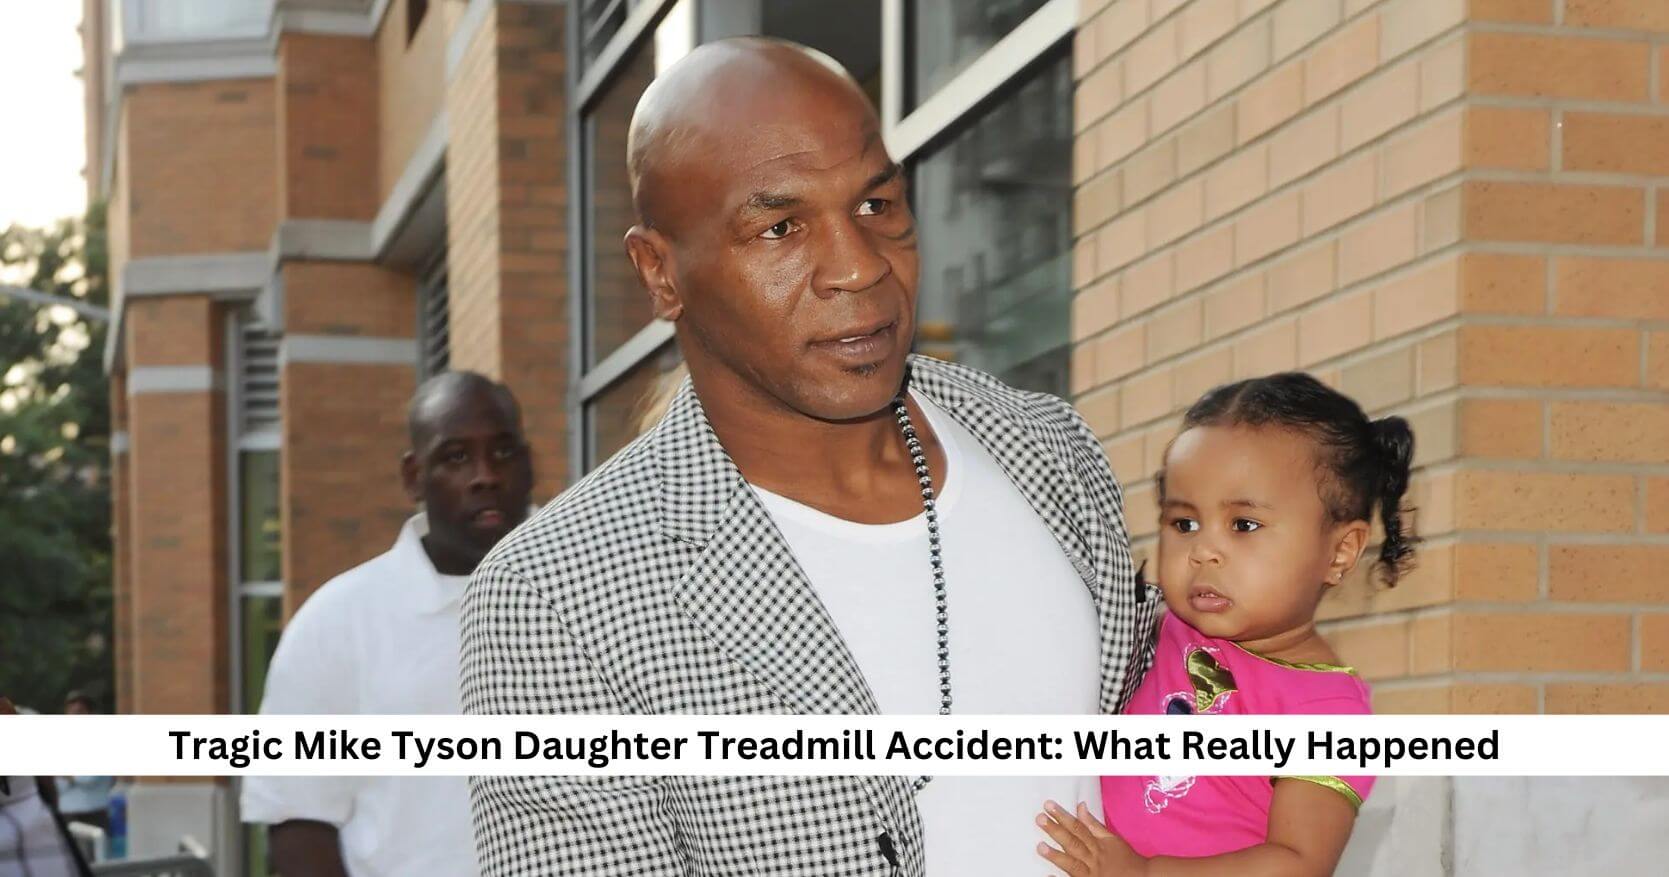 Tragic Mike Tyson Daughter Treadmill Accident: What Really Happened